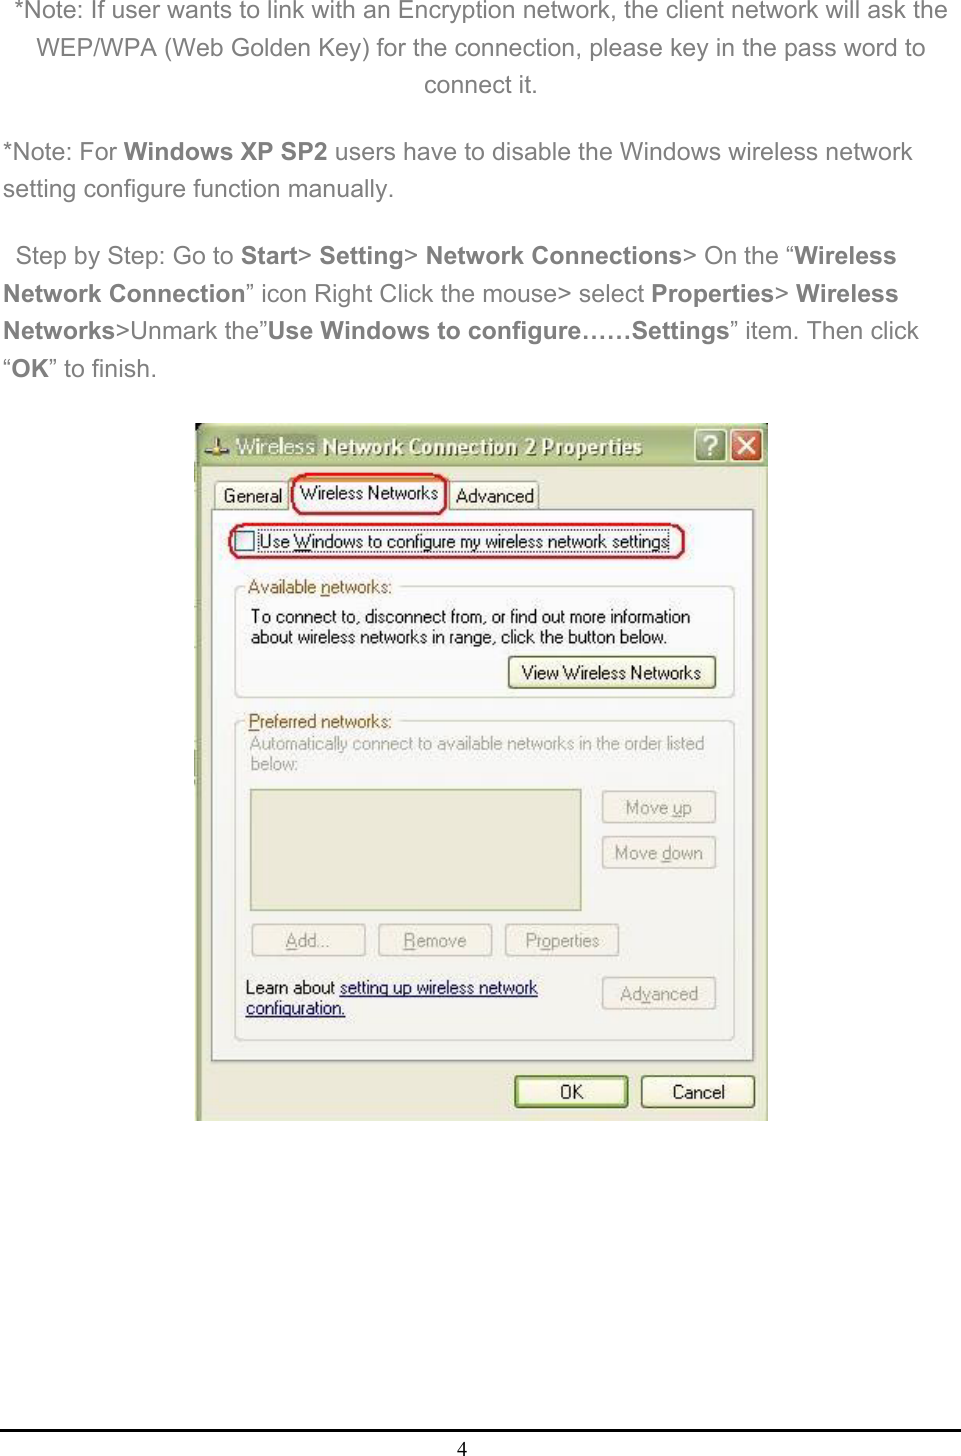 4  *Note: If user wants to link with an Encryption network, the client network will ask the WEP/WPA (Web Golden Key) for the connection, please key in the pass word to connect it.   *Note: For Windows XP SP2 users have to disable the Windows wireless network setting configure function manually.   Step by Step: Go to Start&gt; Setting&gt; Network Connections&gt; On the “Wireless Network Connection” icon Right Click the mouse&gt; select Properties&gt; Wireless Networks&gt;Unmark the”Use Windows to configure……Settings” item. Then click “OK” to finish.      